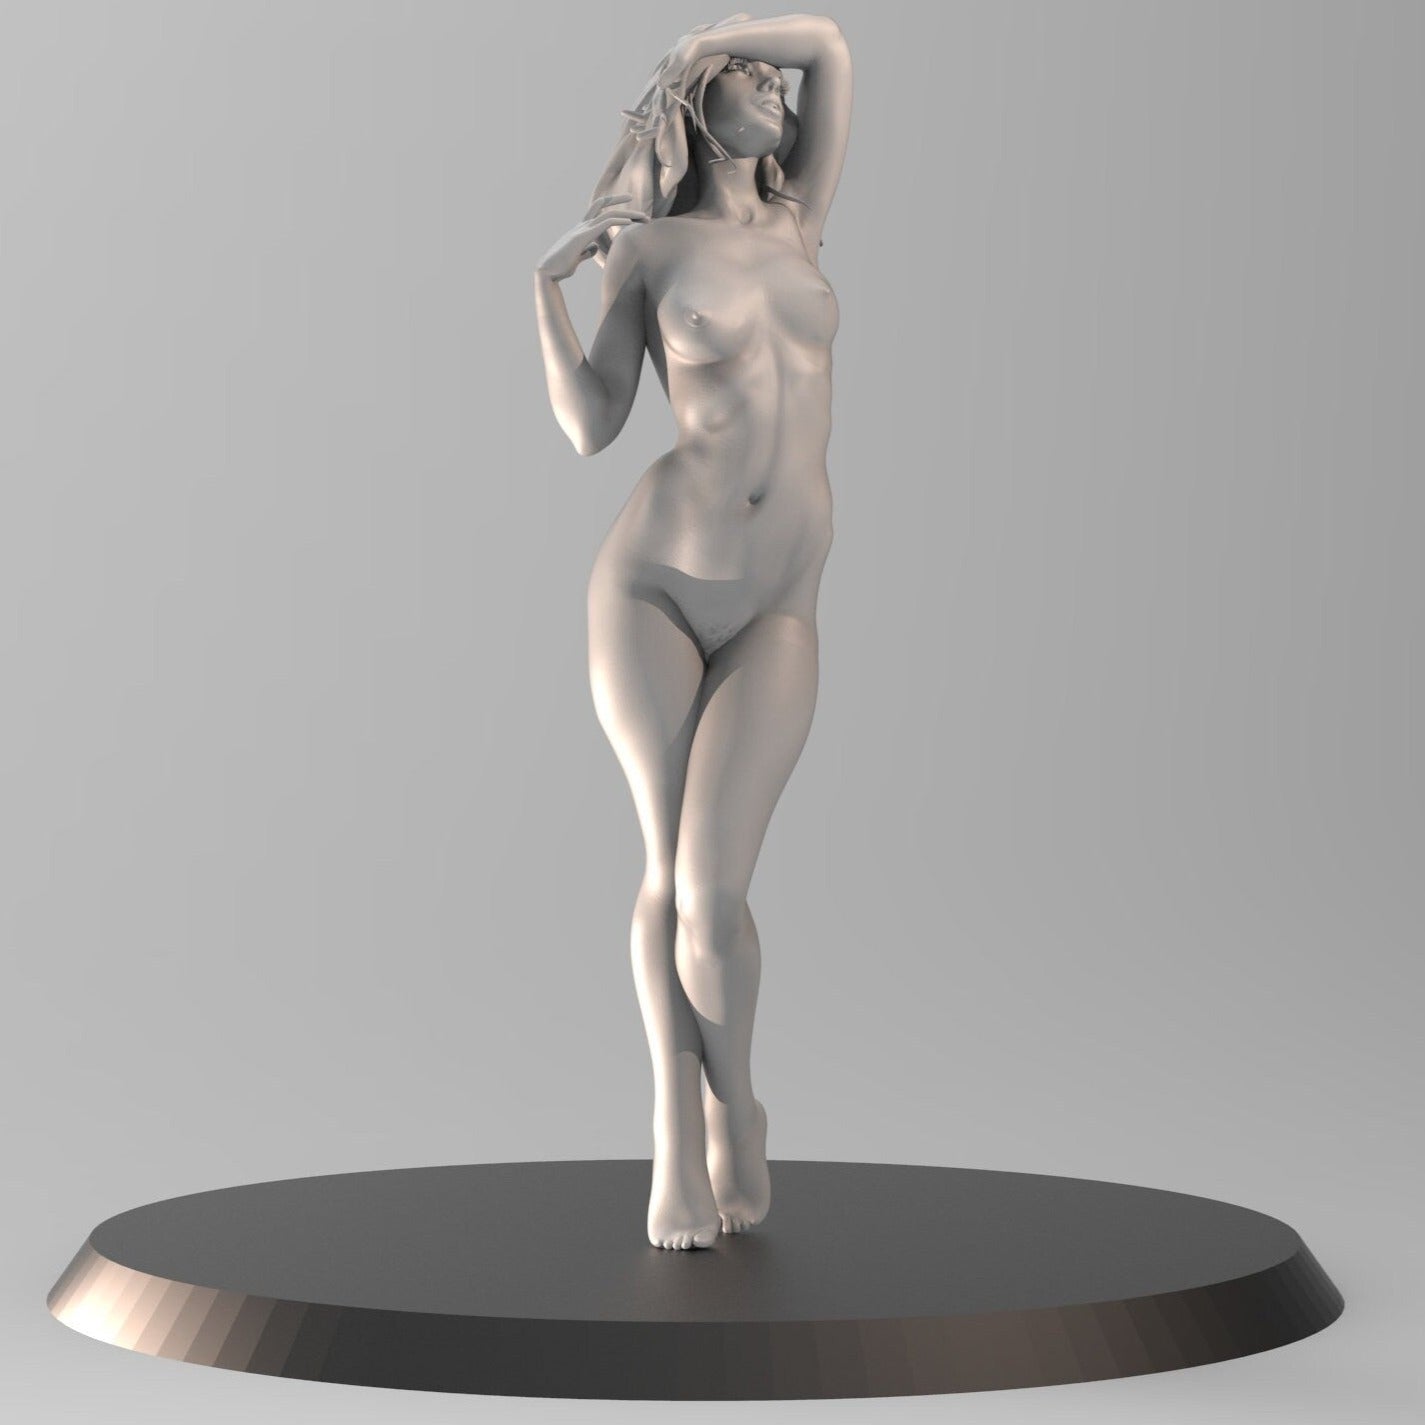 Pinup Girl Vol.1 FLOWER | 35mm / 75mm | 3D Printed | Unpainted | Sexy | Pin|up | NSFW Version | Figurine | Figure | Miniature | Sexy |